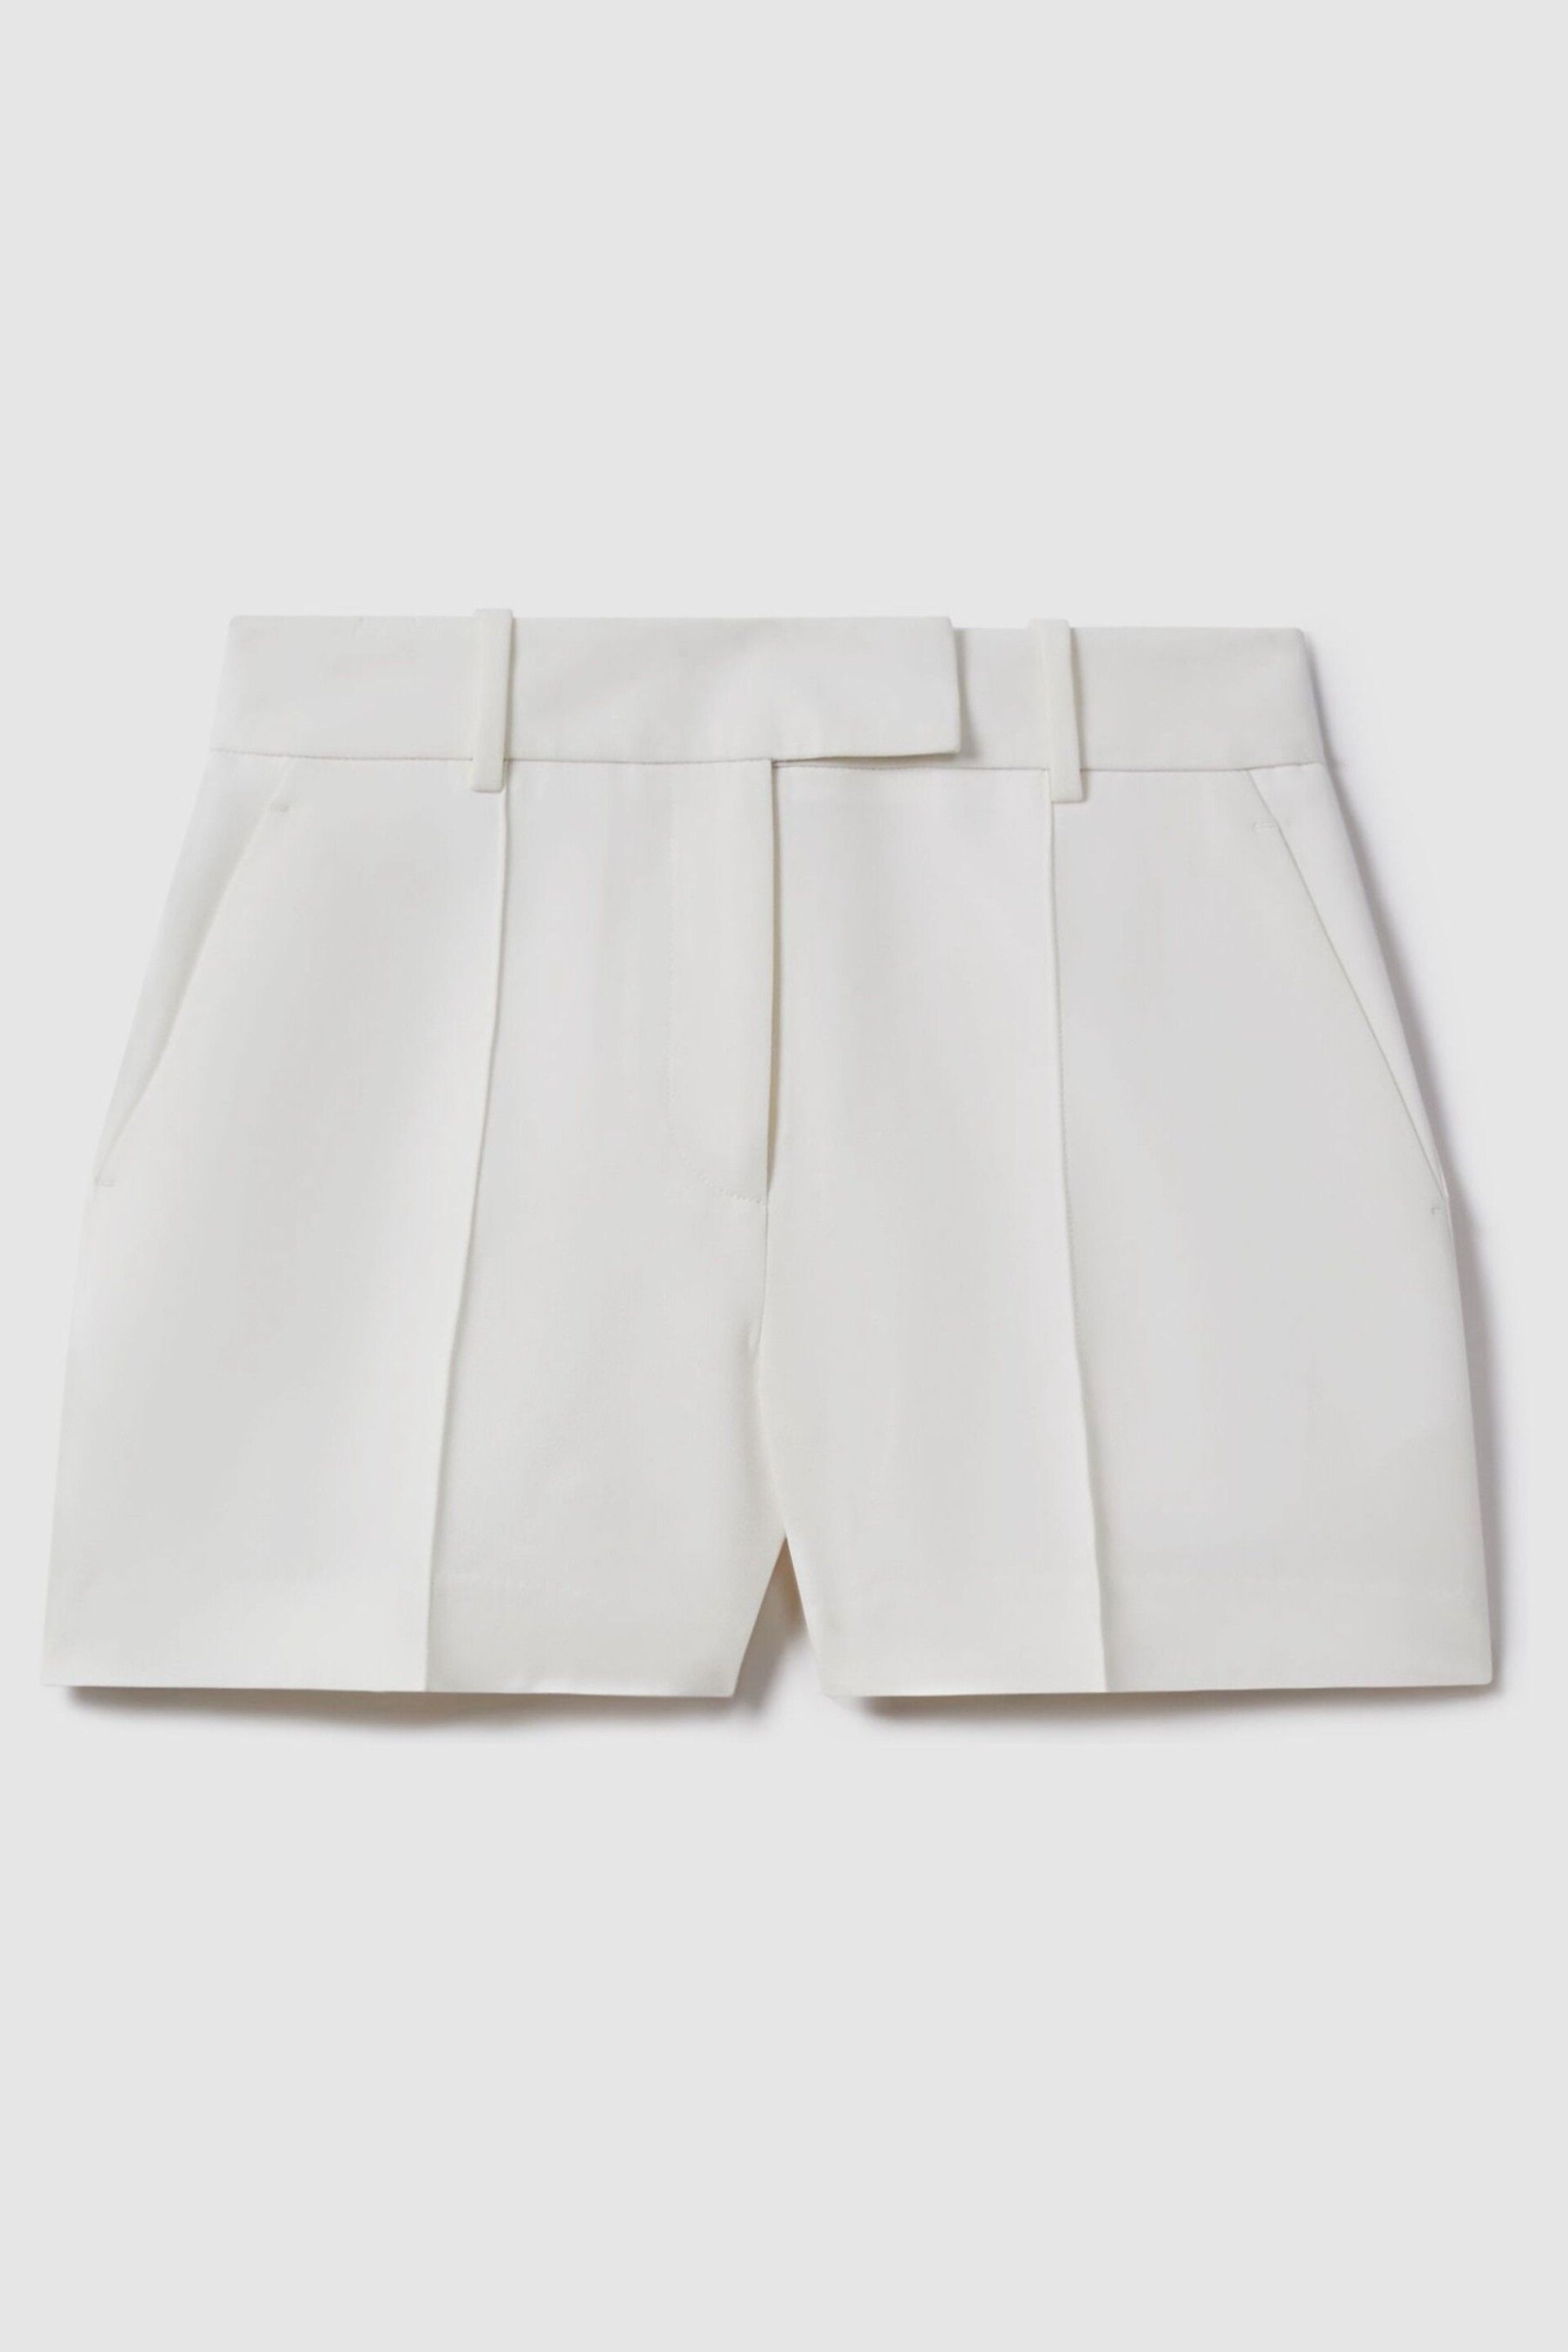 Reiss White Sienna Crepe Tailored Shorts - Image 2 of 6